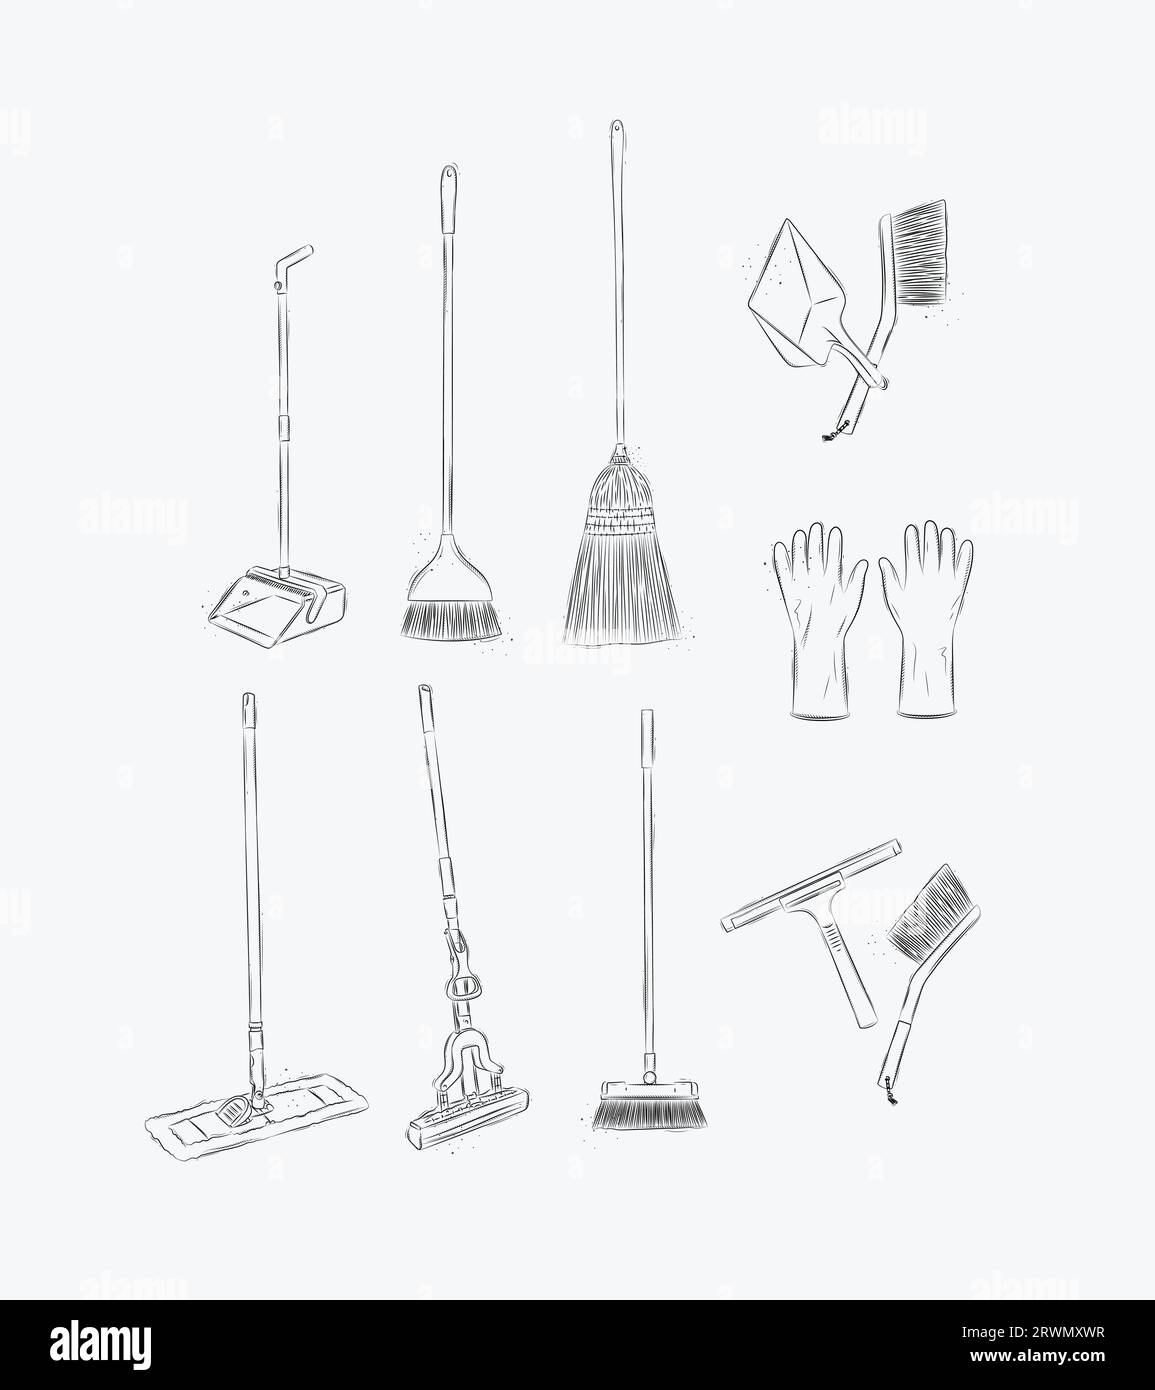 Floor cleaning tools accessories broom, dustpan, mop, gloves, scraper, brush drawing in graphic style on white background Stock Vector